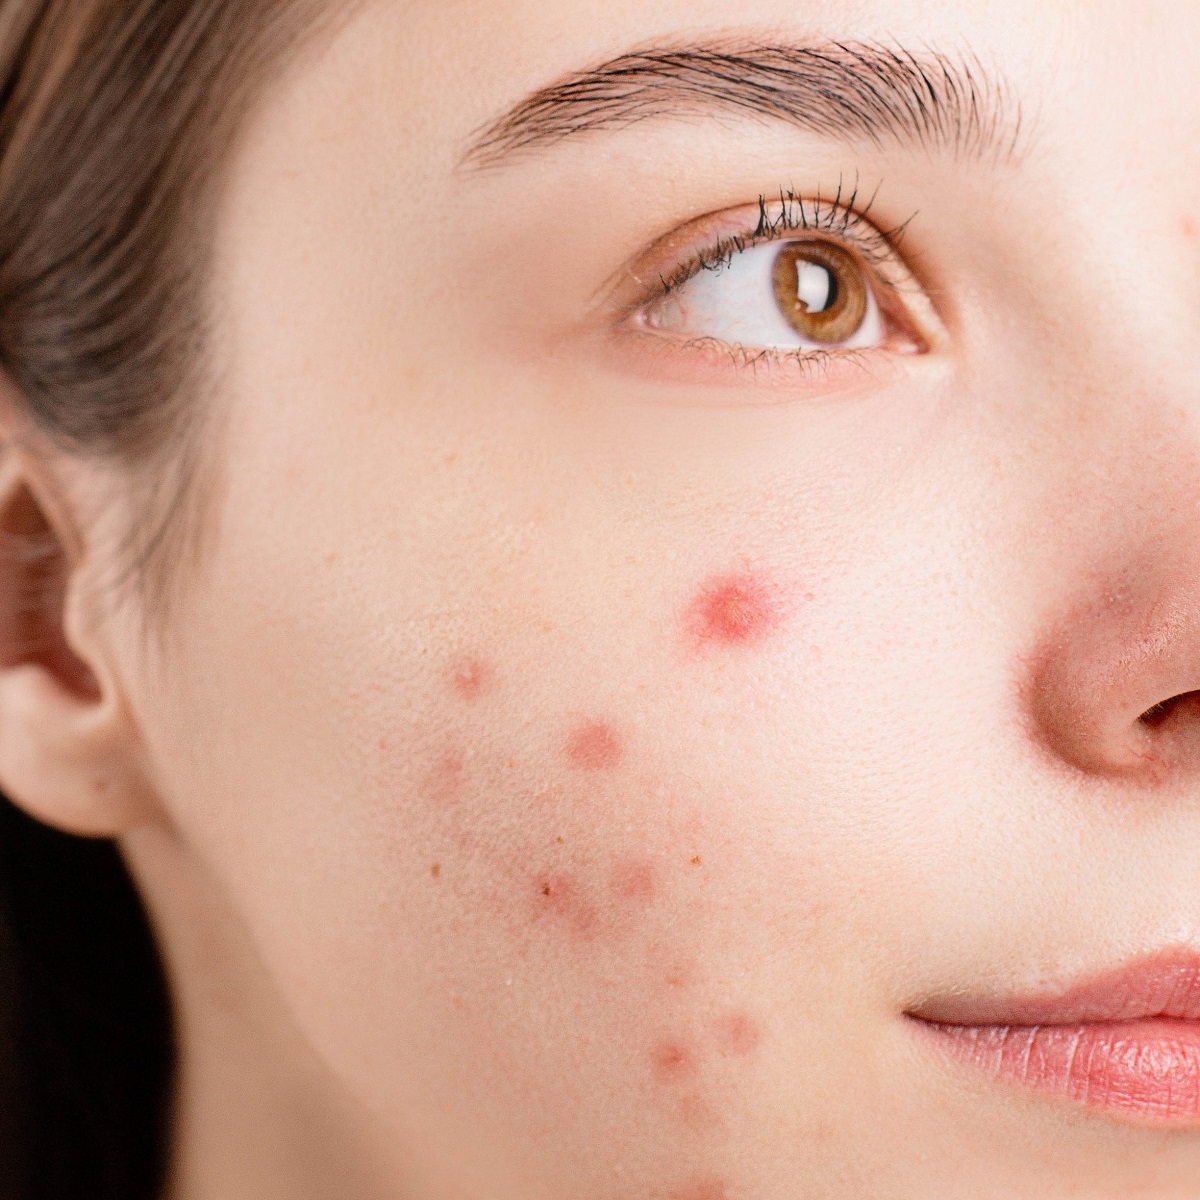 Read more about the article ACNE – Symptoms, Causes, Complications, and Treatment